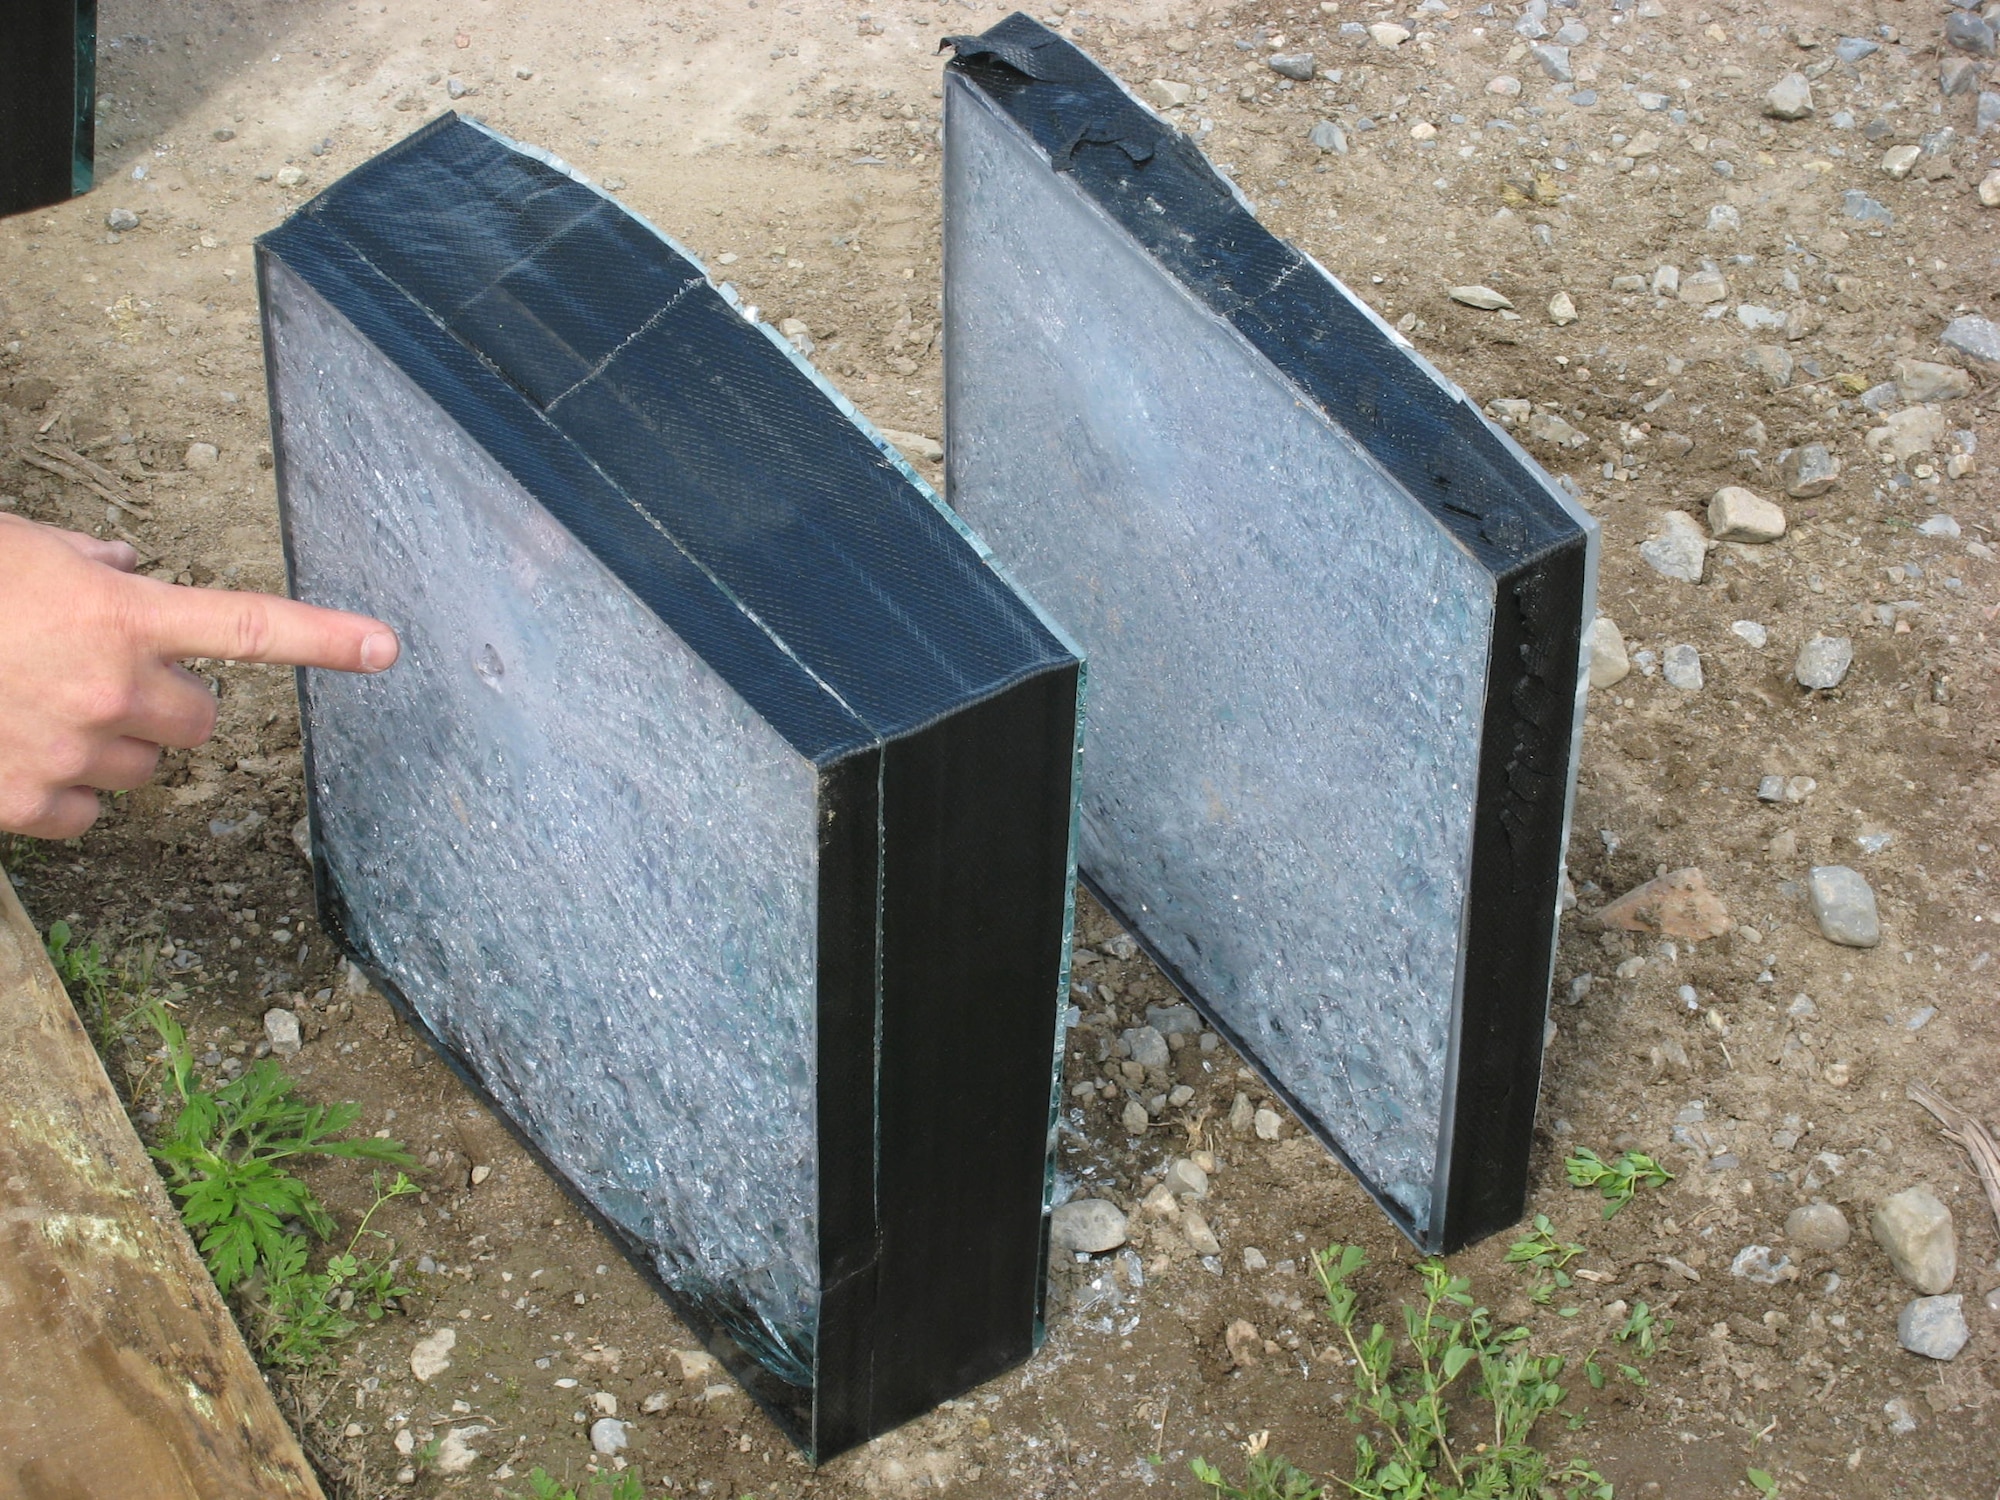 A projectile exit point is shown in the ballistic glass (left). The aluminum oxynitride transparent ceramic armor is shown (right) with a bulge and no exit from the projectile. (Courtesy photo)